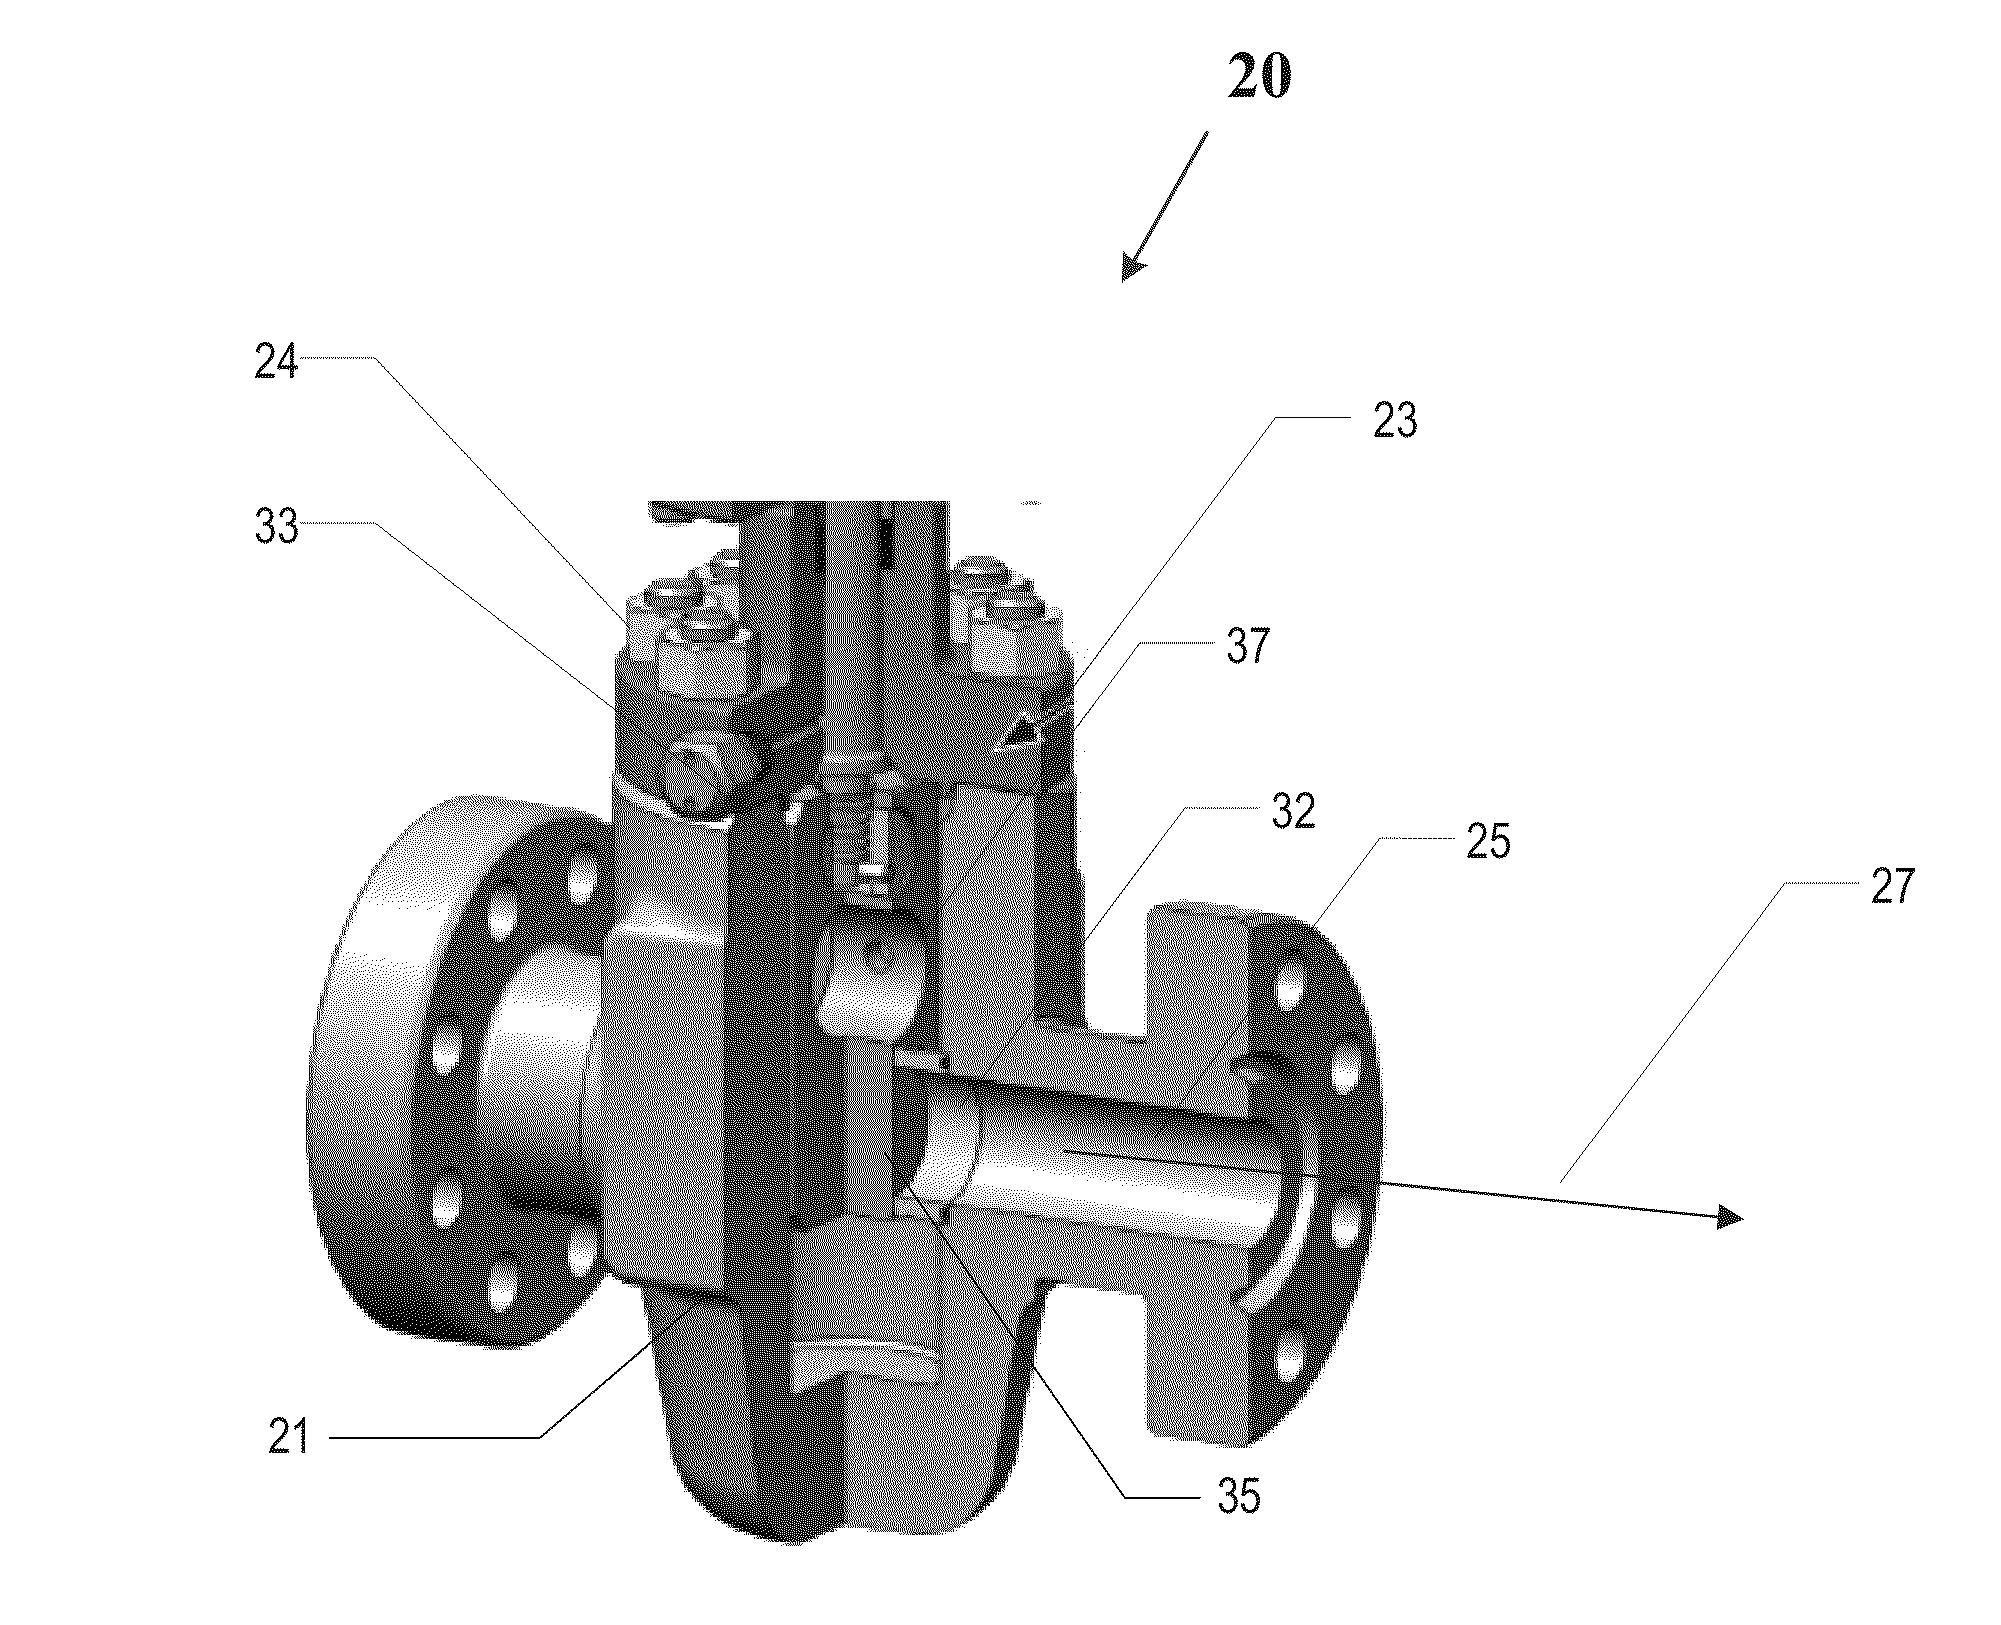 Gate Valve Real Time Health Monitoring System, Apparatus, Program Code and Related Methods